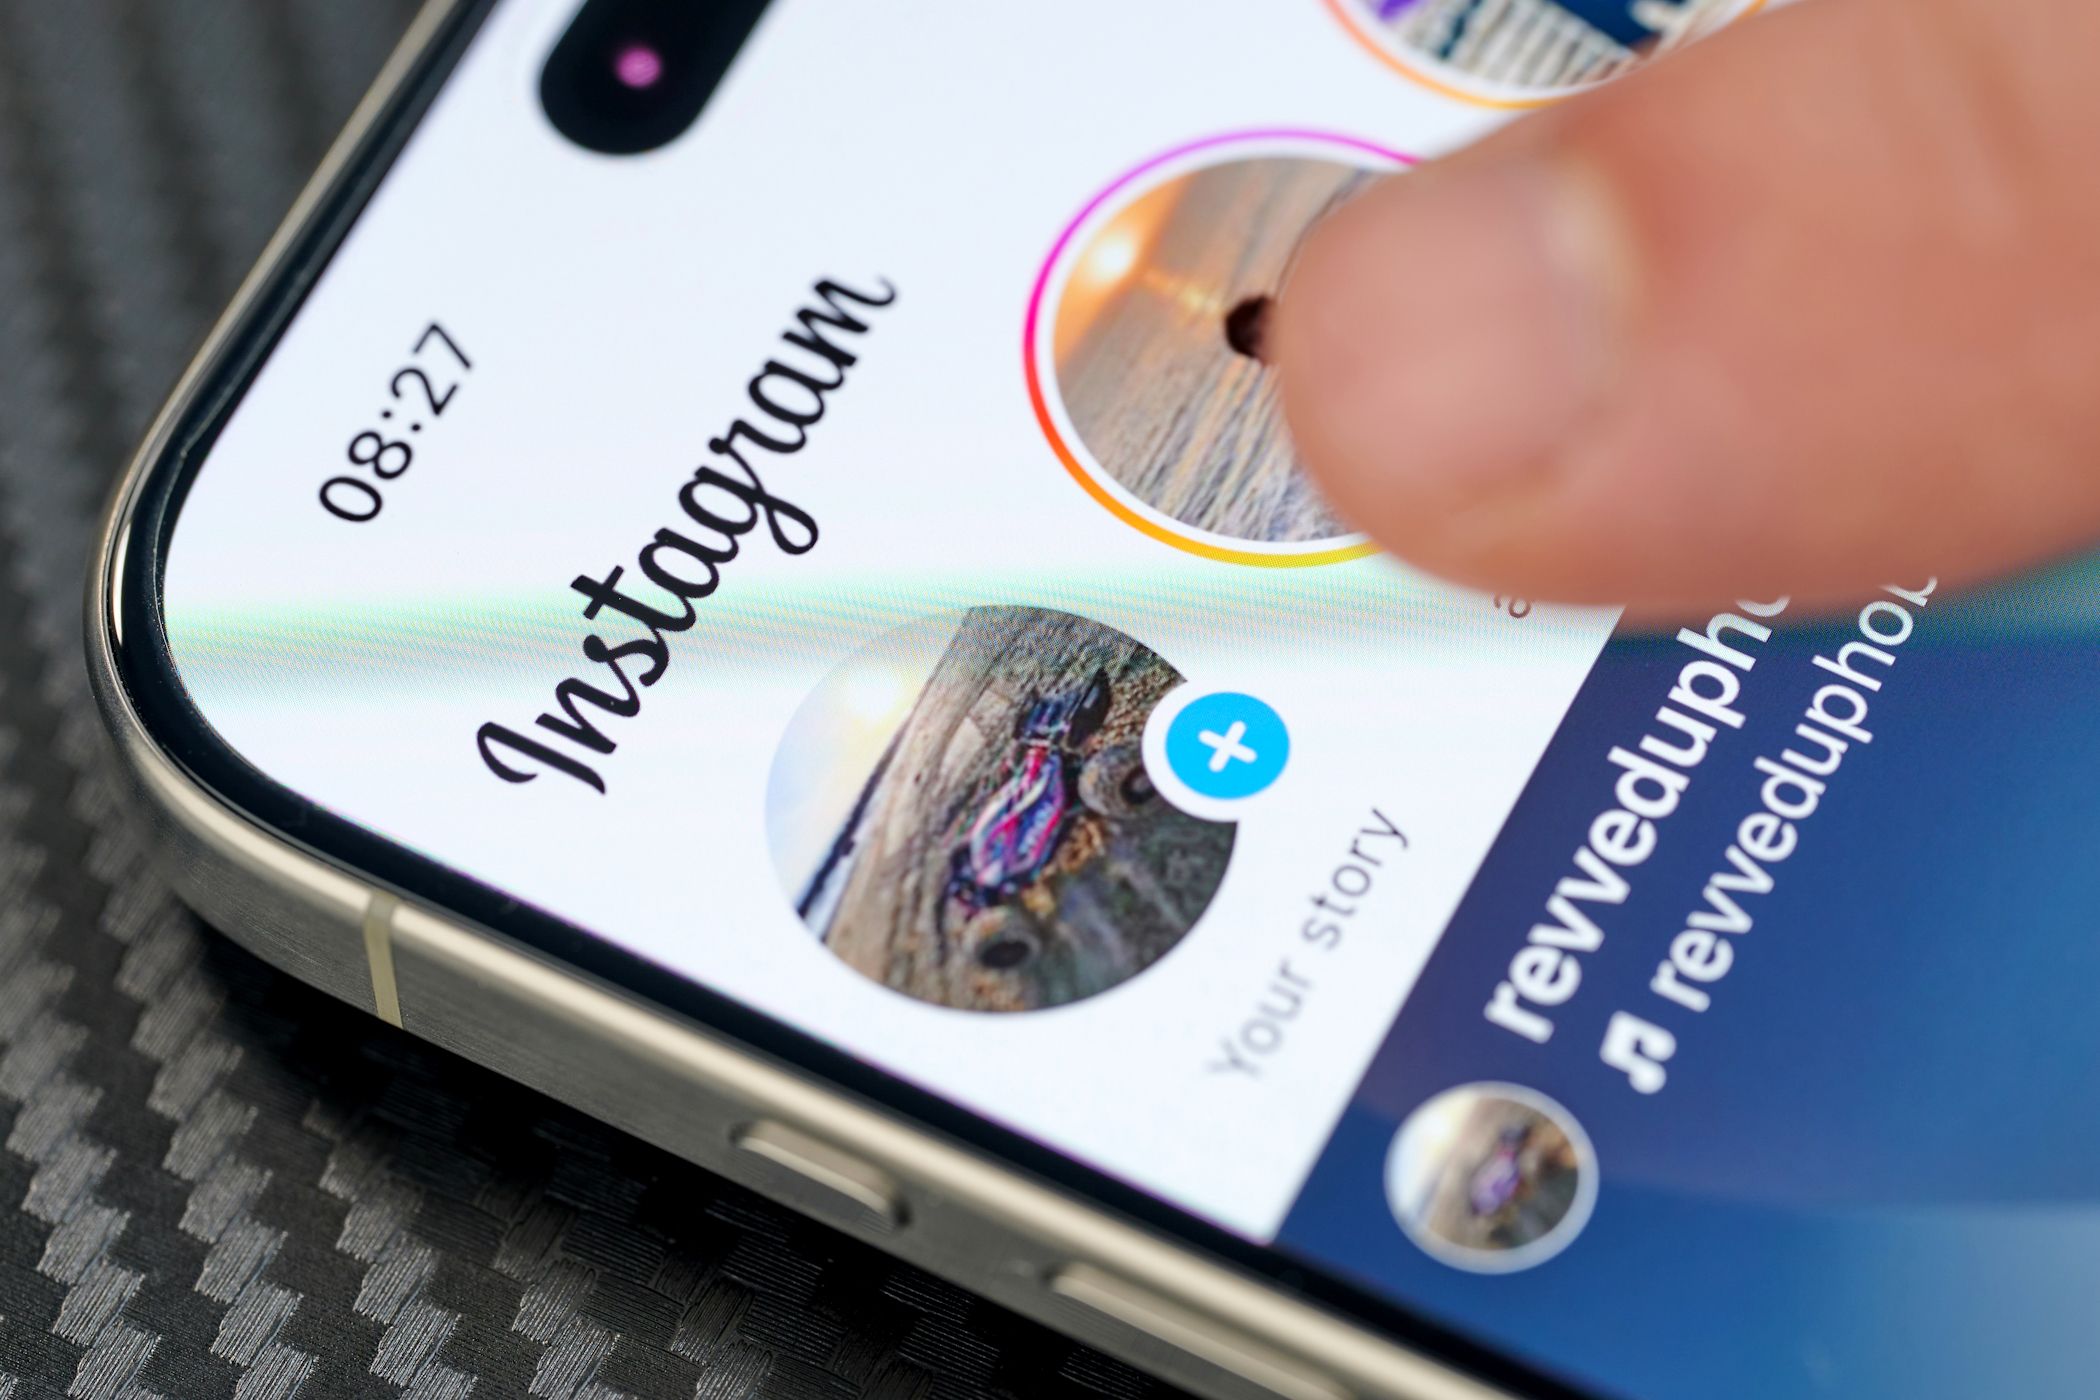 instagram stories pushed on smartphone screen